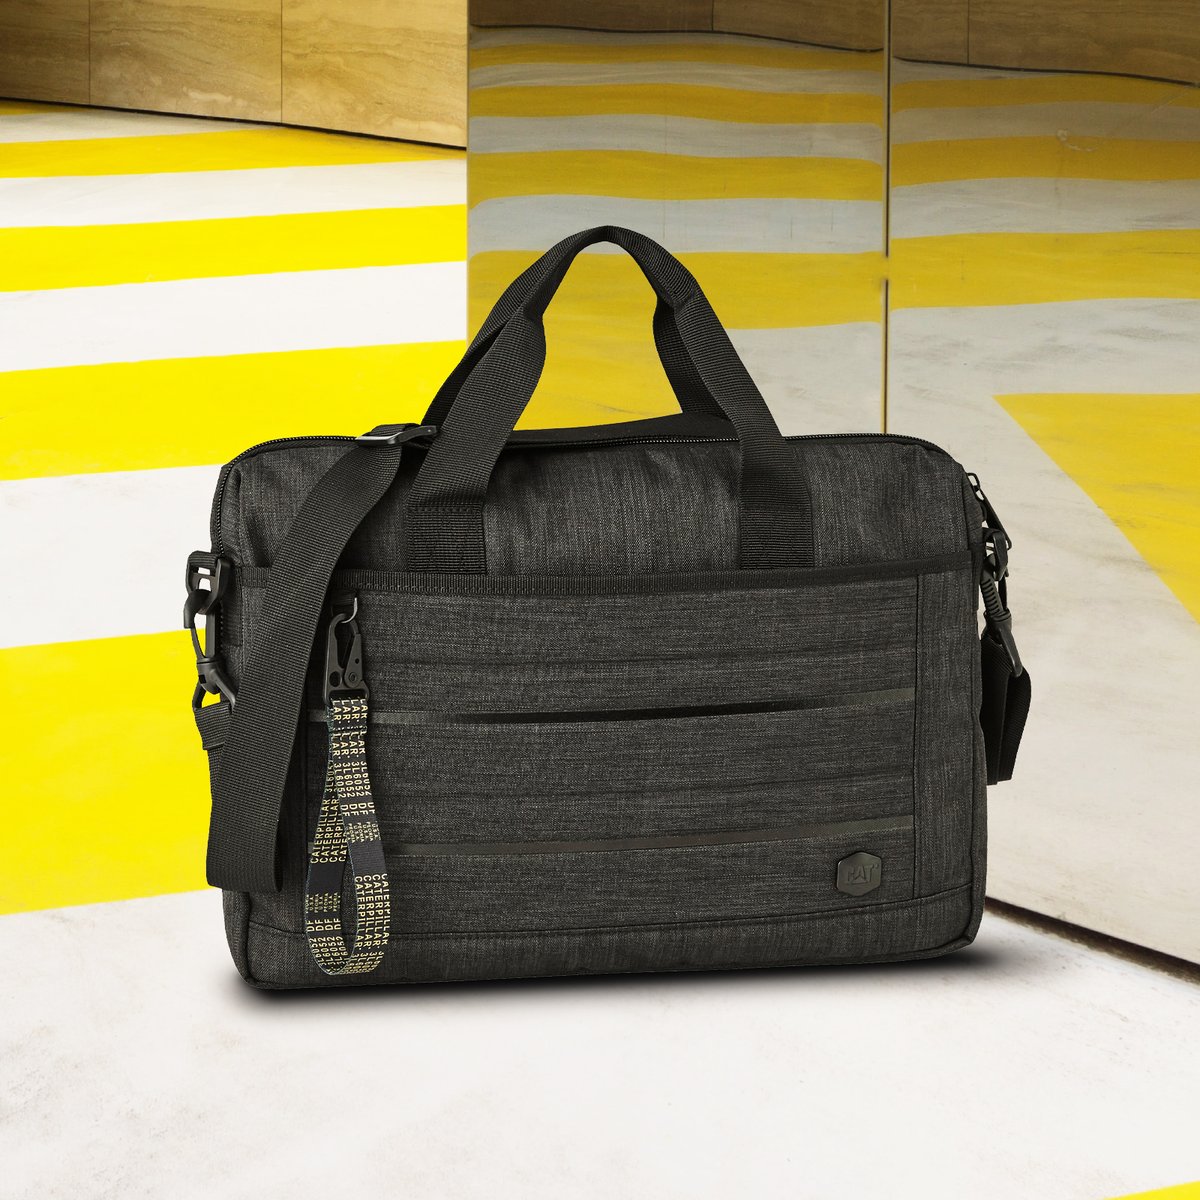 Elevate your business attire with the sleek and sophisticated B. Holt Slim Briefcase. Designed to hold your essentials in style, it's the perfect companion for your professional journey. #catfootwearsa #footwear #shoes #fashion #streetstyle #caterpillar #apparel #catapparel